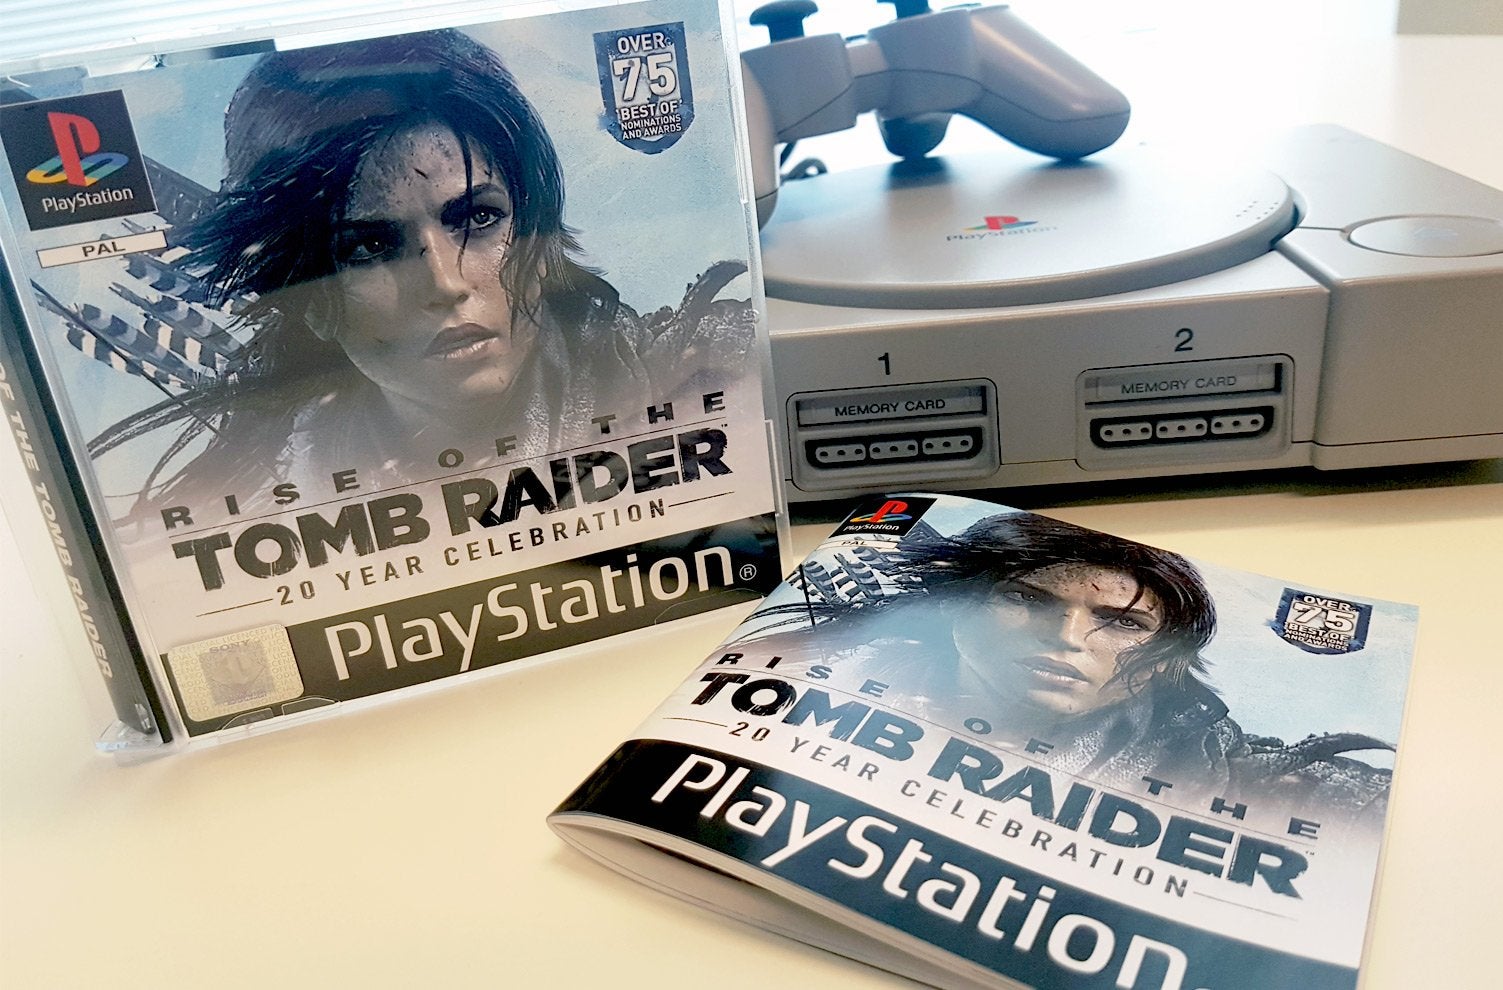 Image for We want this Rise of the Tomb Raider: 20 year Celebration PS1 case, but Square Enix doesn't seem inclined to sell it